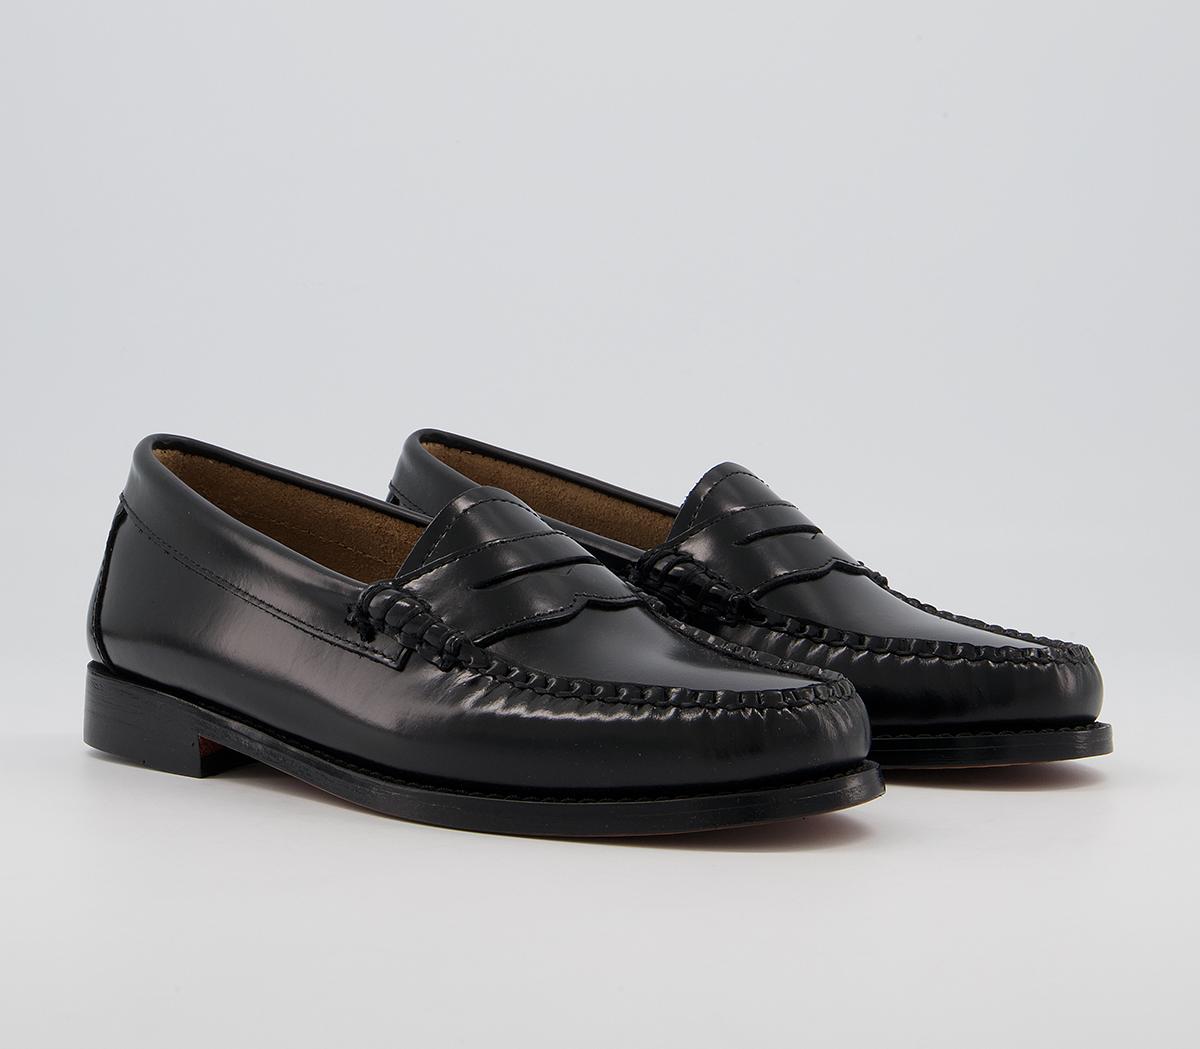 G. H Bass Black Leather Weejuns Penny Loafers, 5